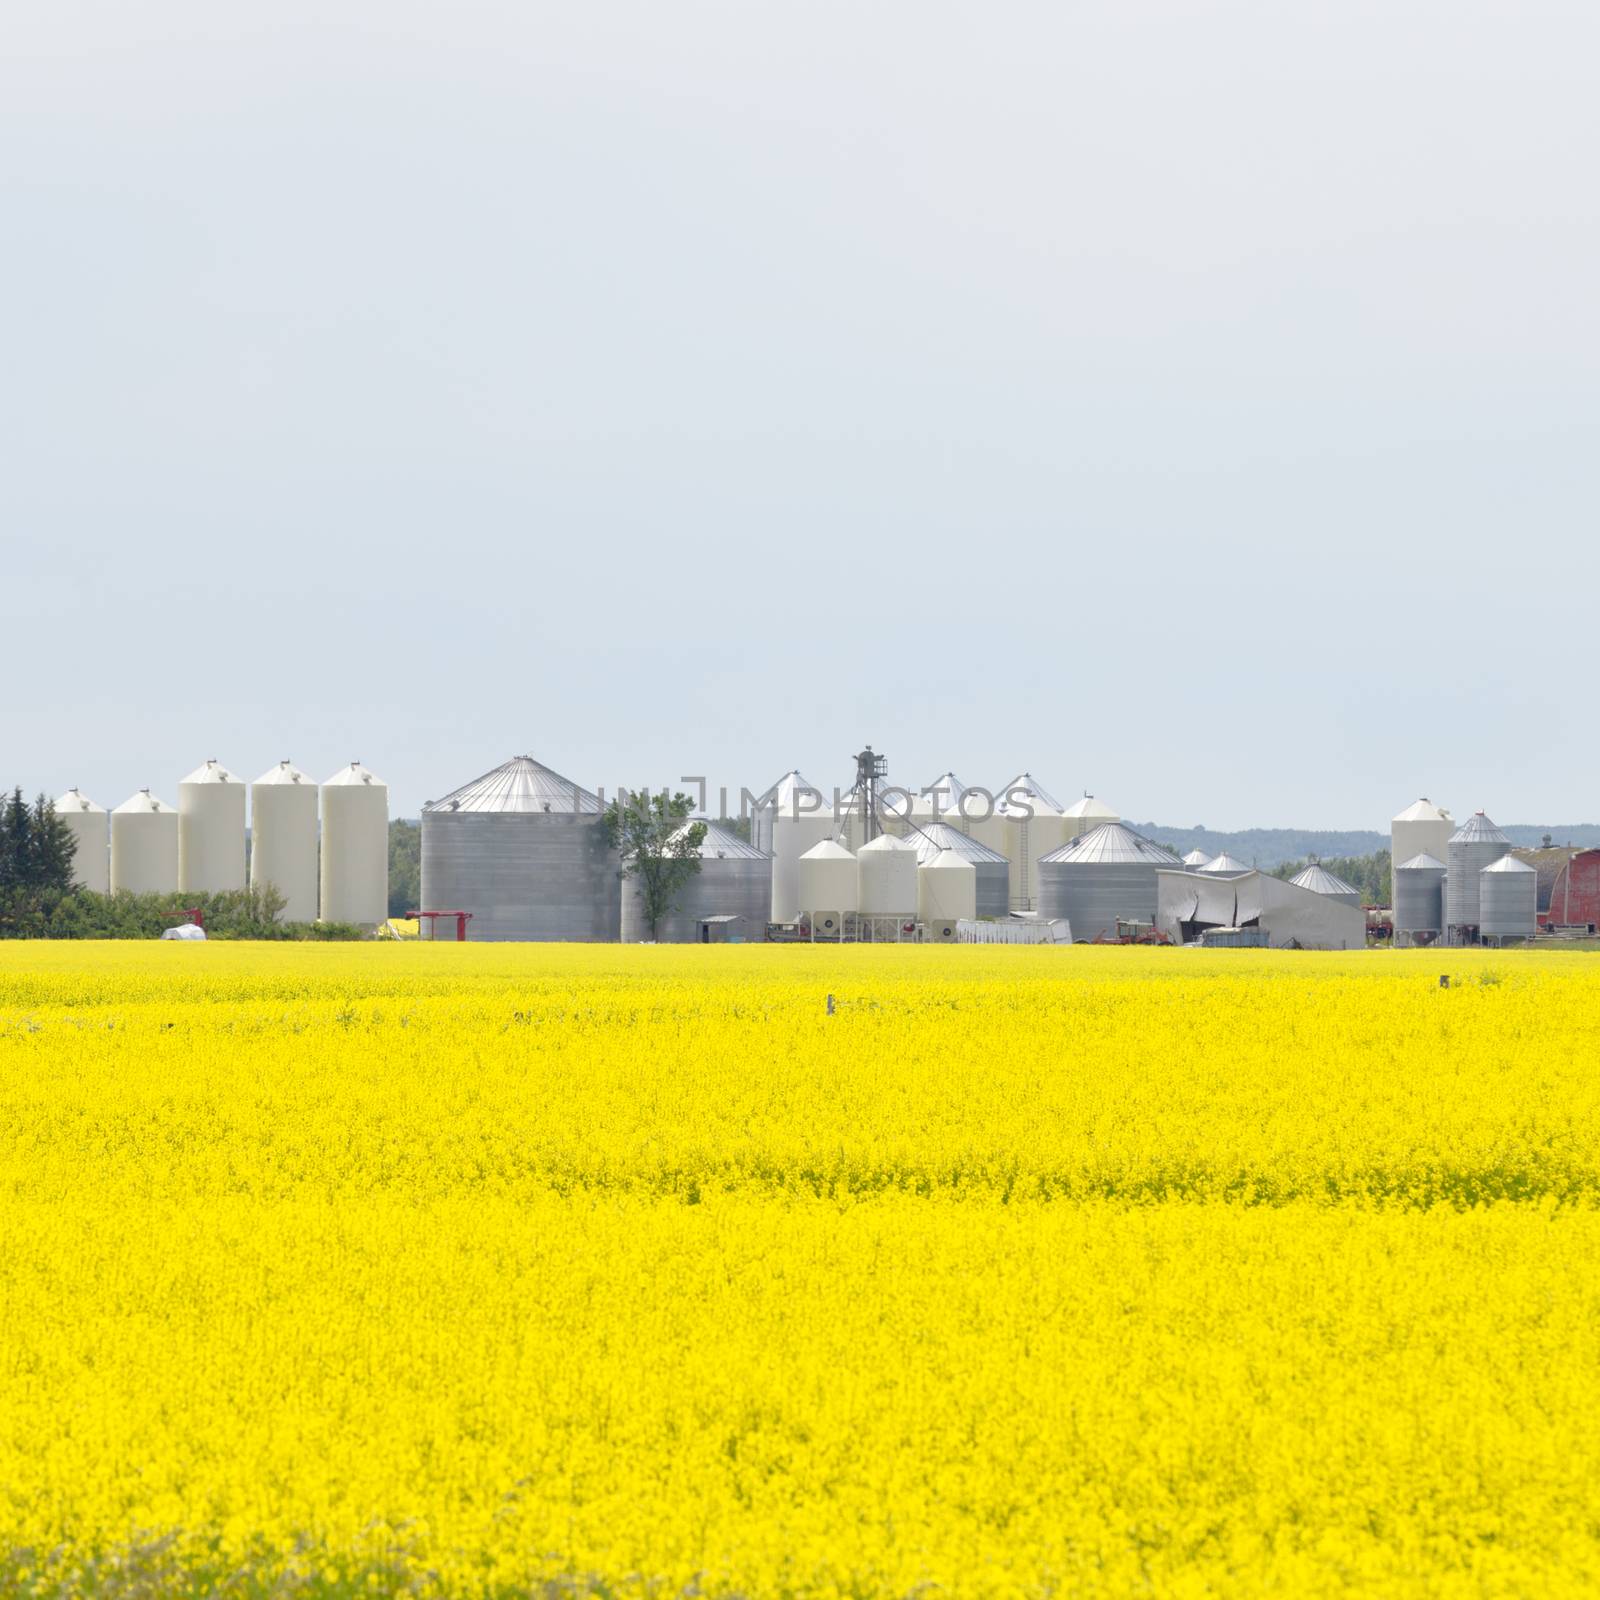 Grain silos canola rapeseed agriculture field by PiLens